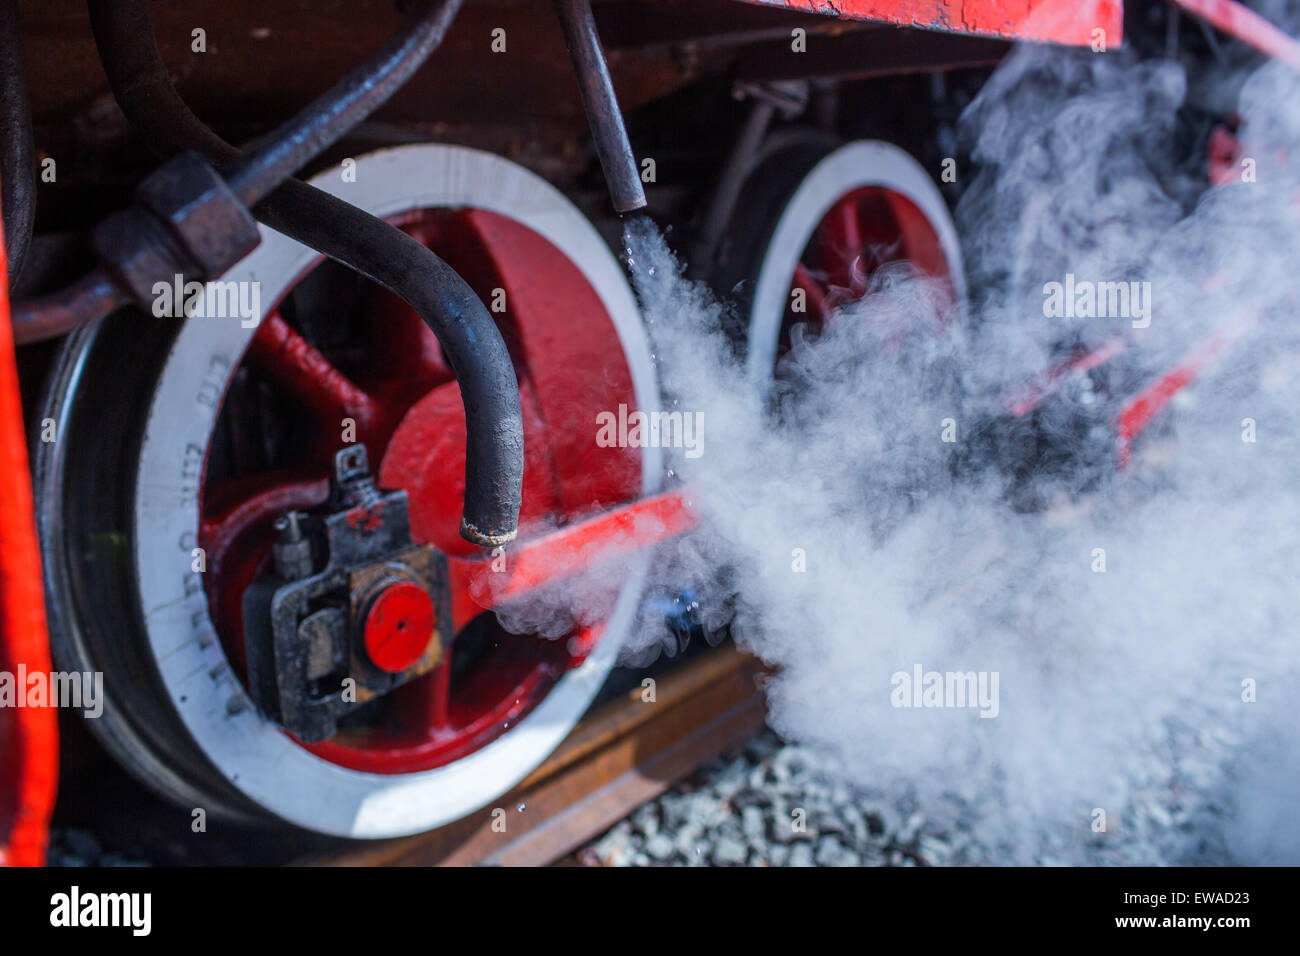 Kluetz, Germany. 20th June, 2015. Steam hisses out of the twenty-ton coal fired 'Px 38-805' train built in 1939 by the Polish State Railways in station of Kluetz, Germany, 20 June 2015. To mark the first anniversary of the tourist train service with the 600 mm track, the circuit will be run with a historic steam train. Photo: JENS BUETTNER/dpa/Alamy Live News Stock Photo